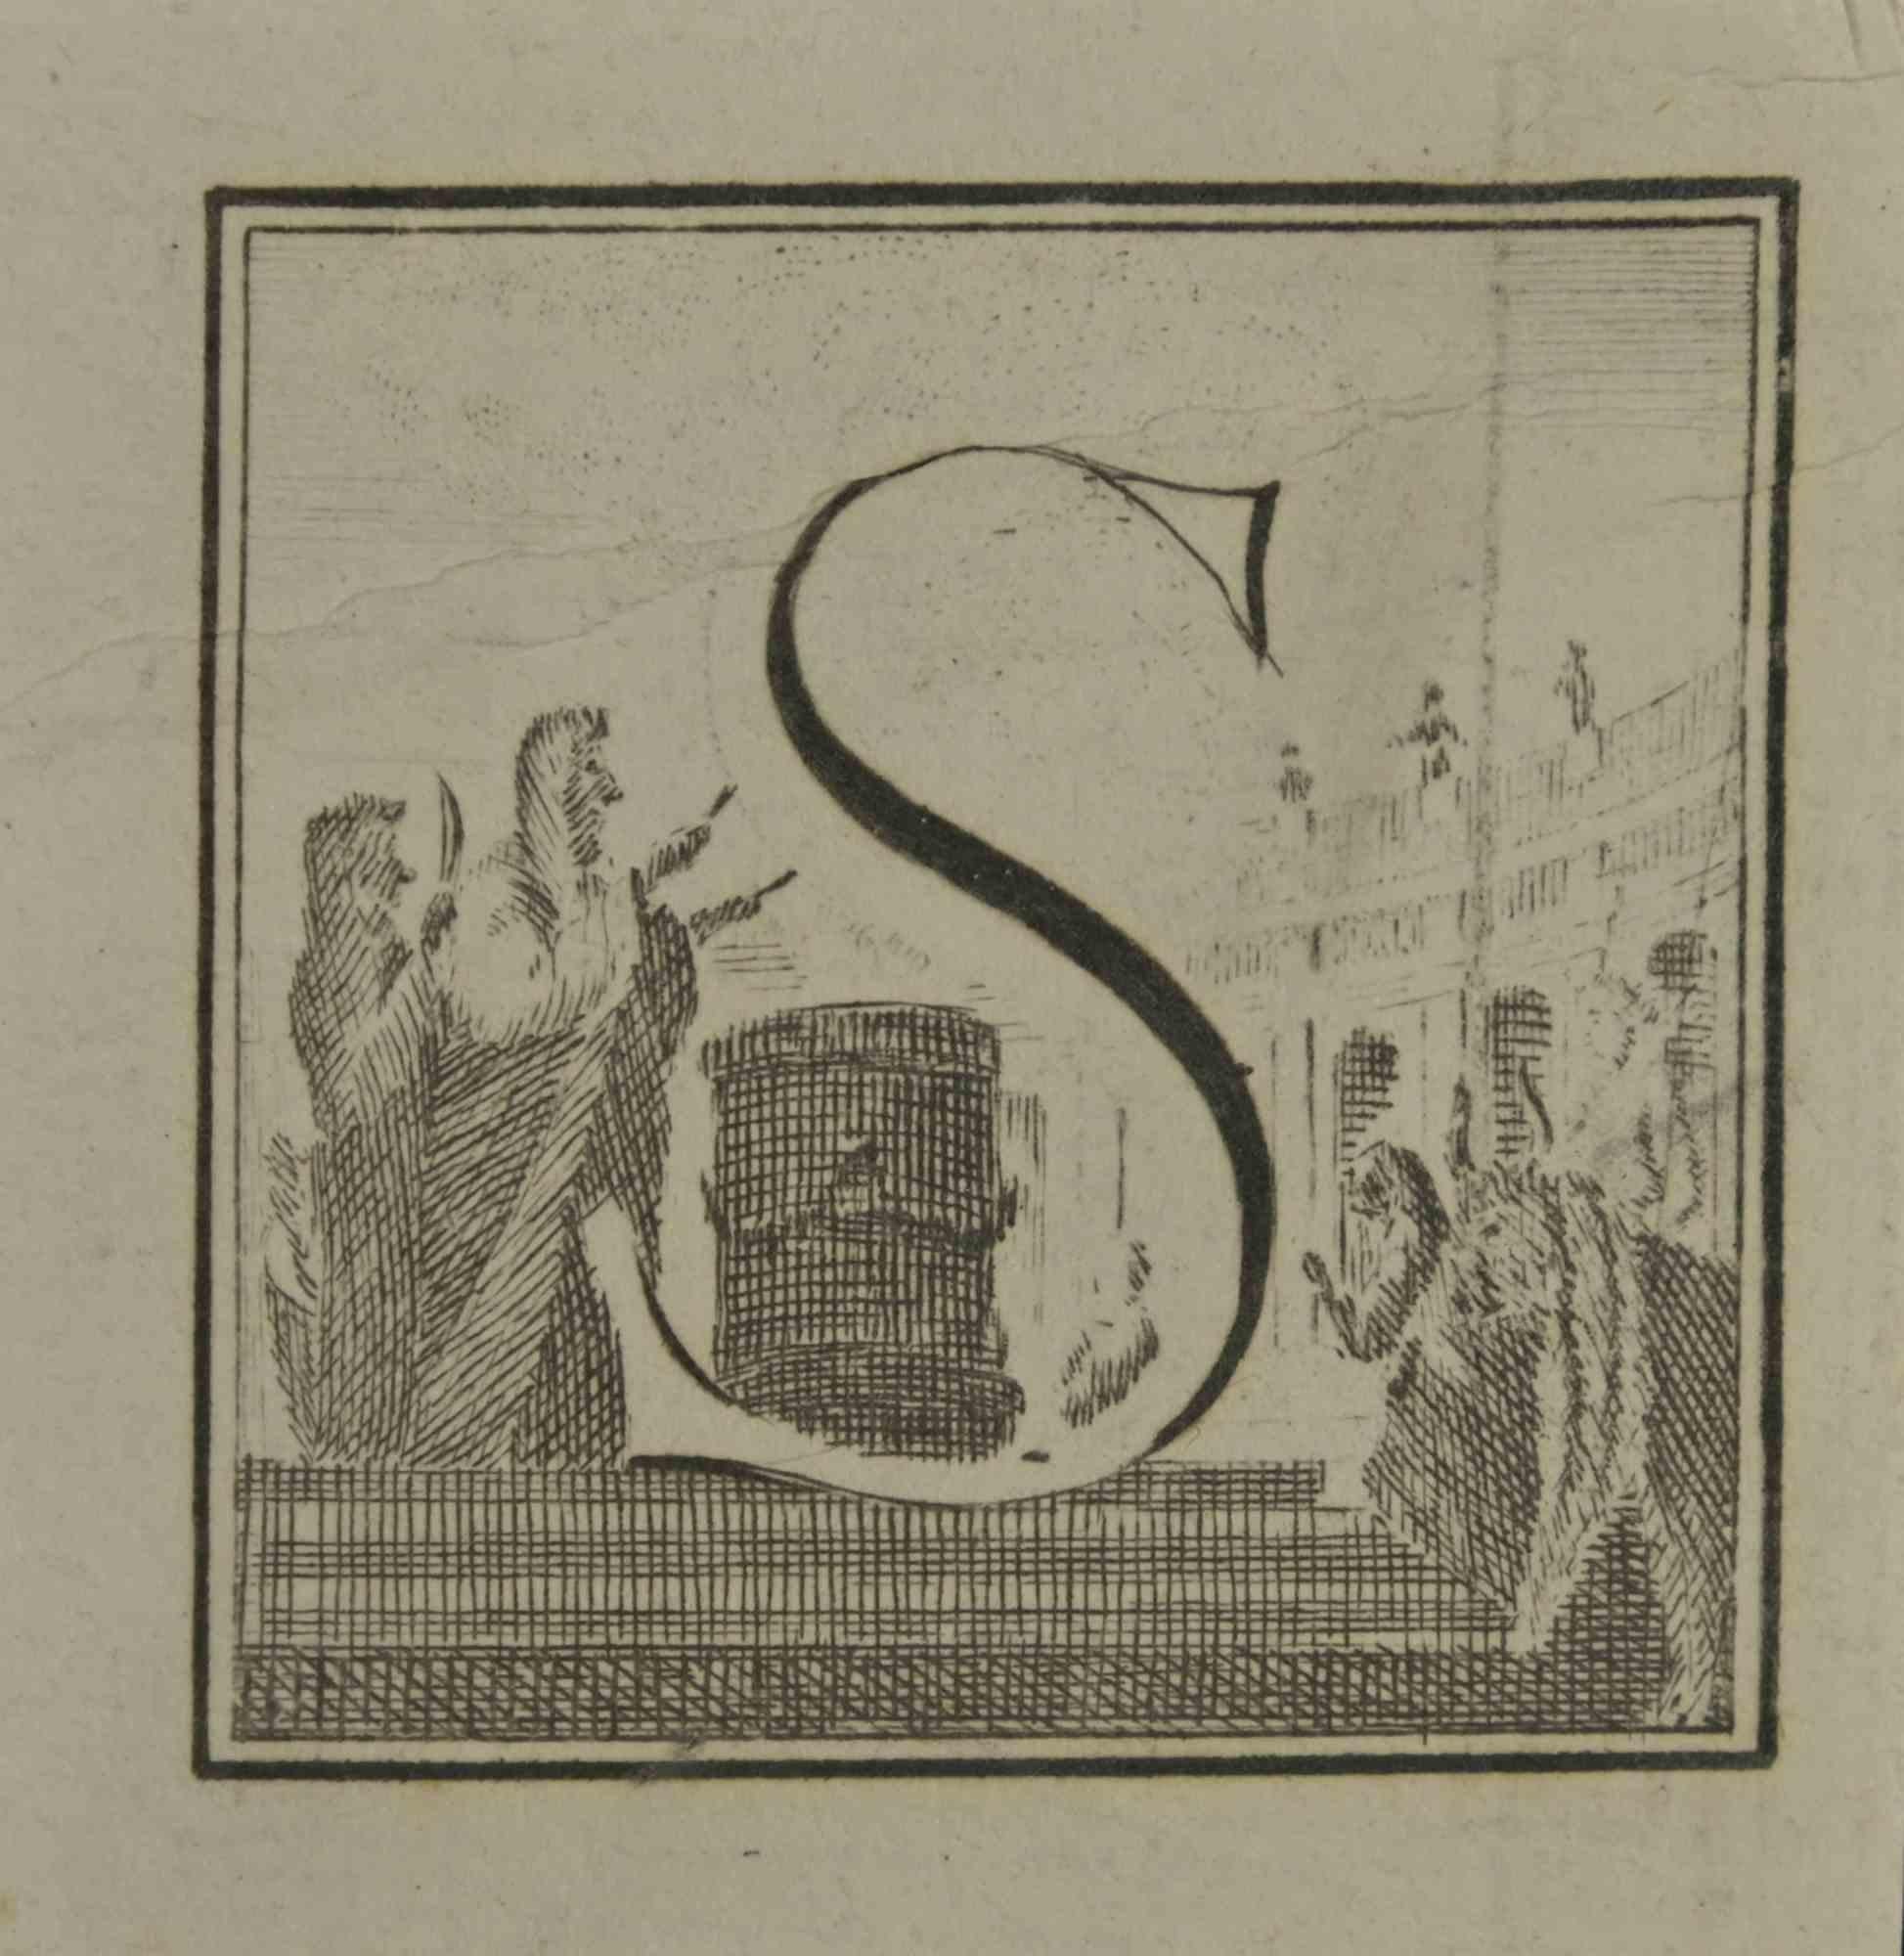 Letter S is an etching realized by Luigi Vanvitelli artist of the 18th century.

The etching belongs to the print suite “Antiquities of Herculaneum Exposed” (original title: “Le Antichità di Ercolano Esposte”), an eight-volume volume of engravings